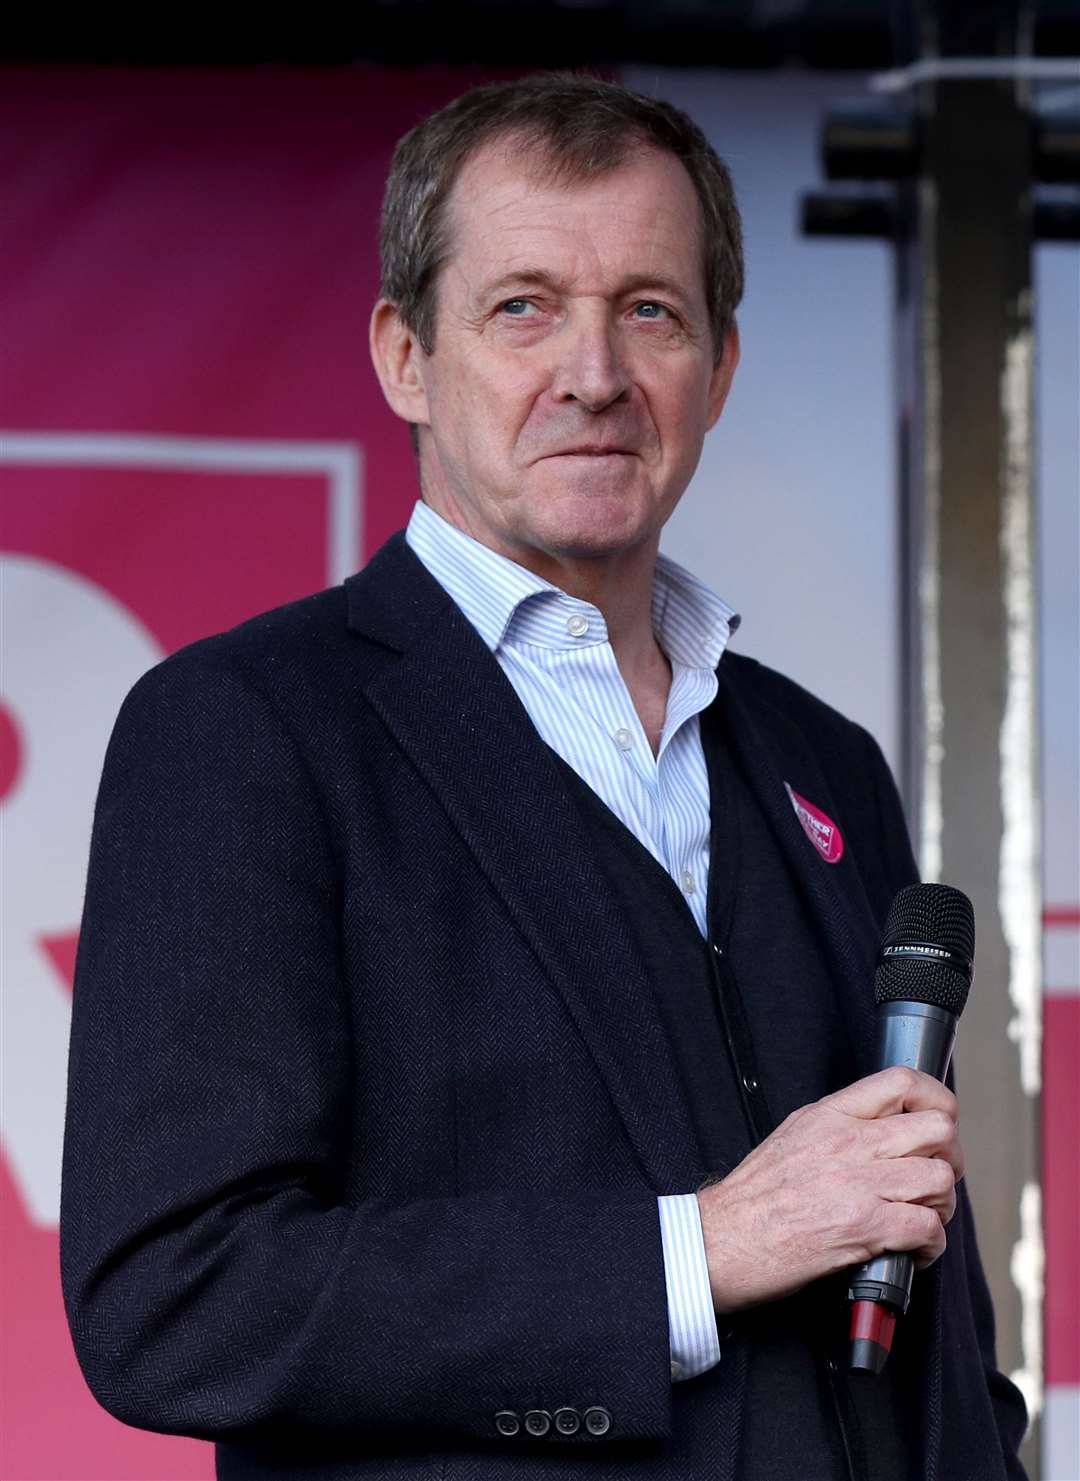 Alastair Campbell spoke about how he and Edwards had discussed depression (Yui Mok/PA)